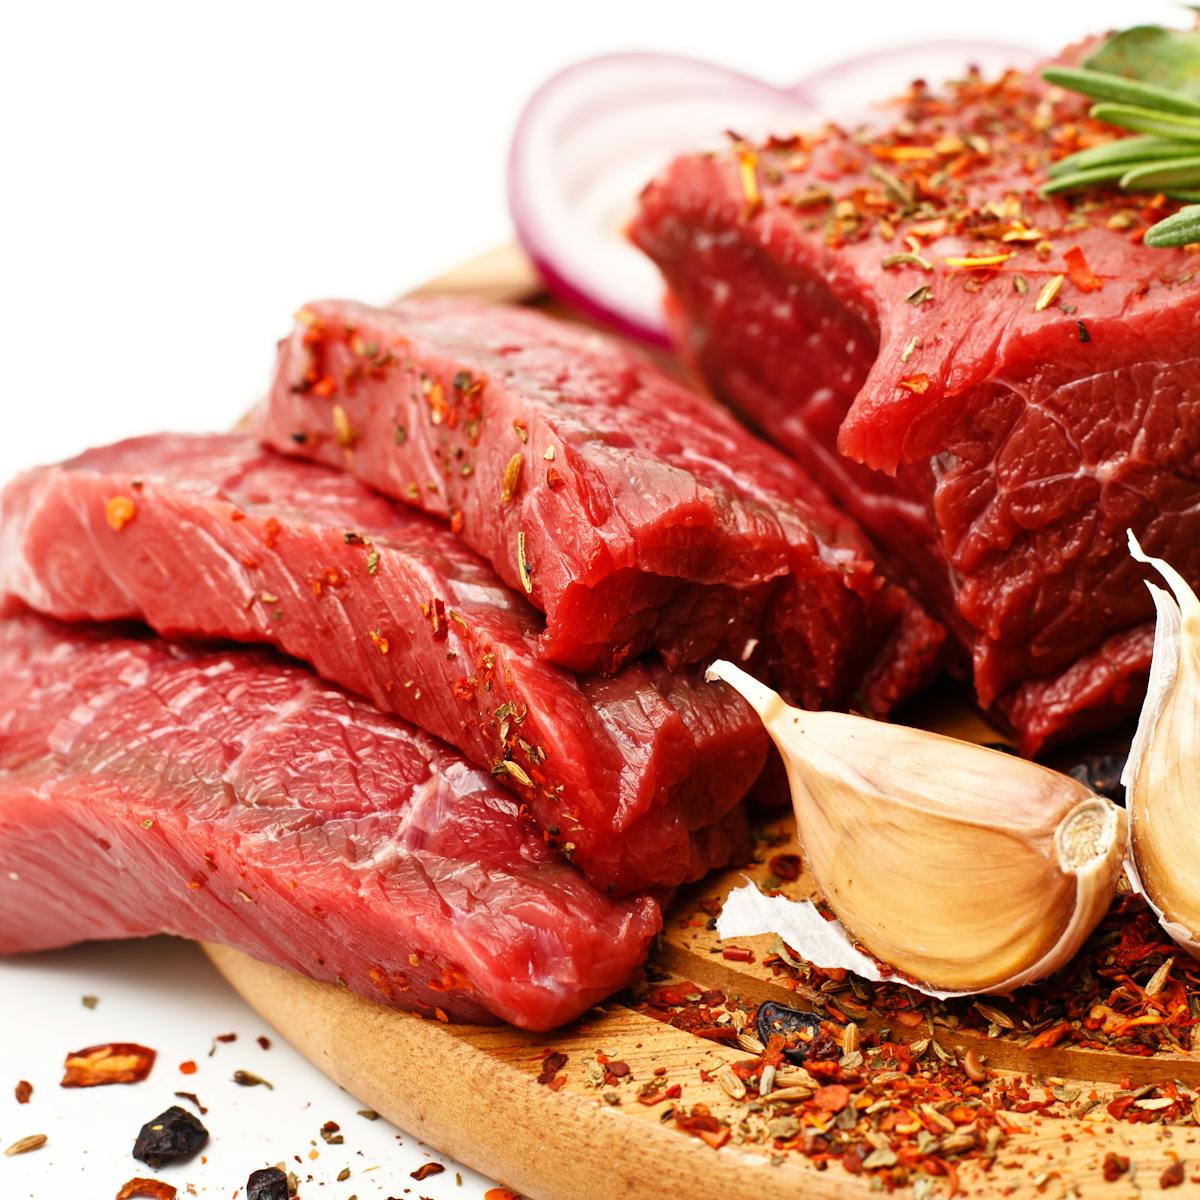 Should I eat red meat? Confusing studies diminish trust in nutrition science